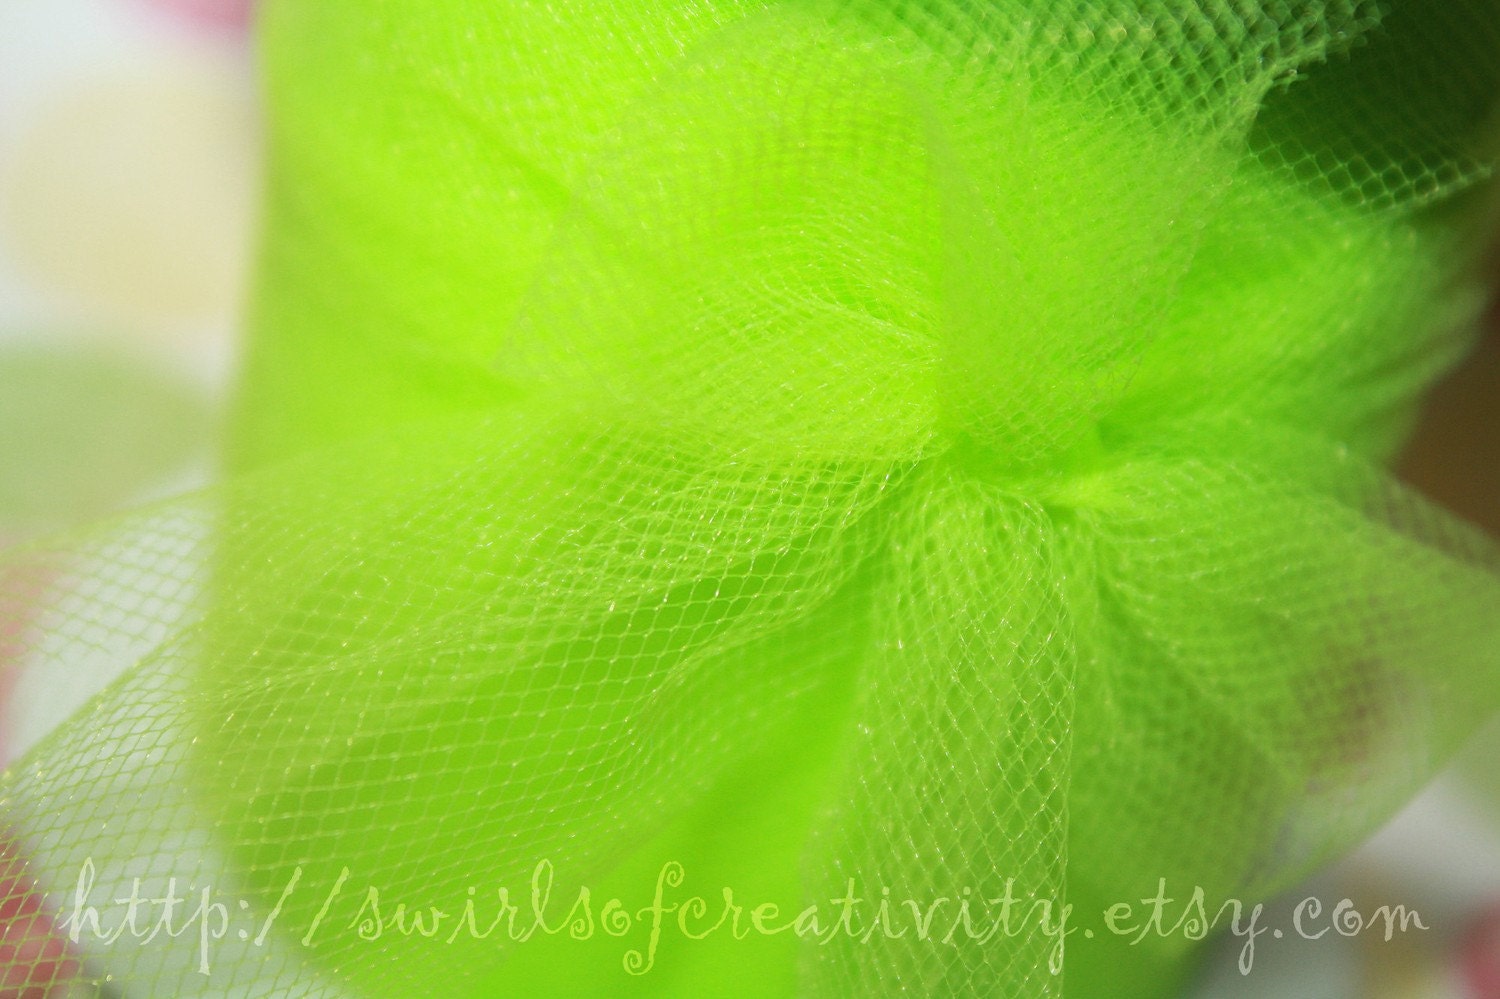 green tulle